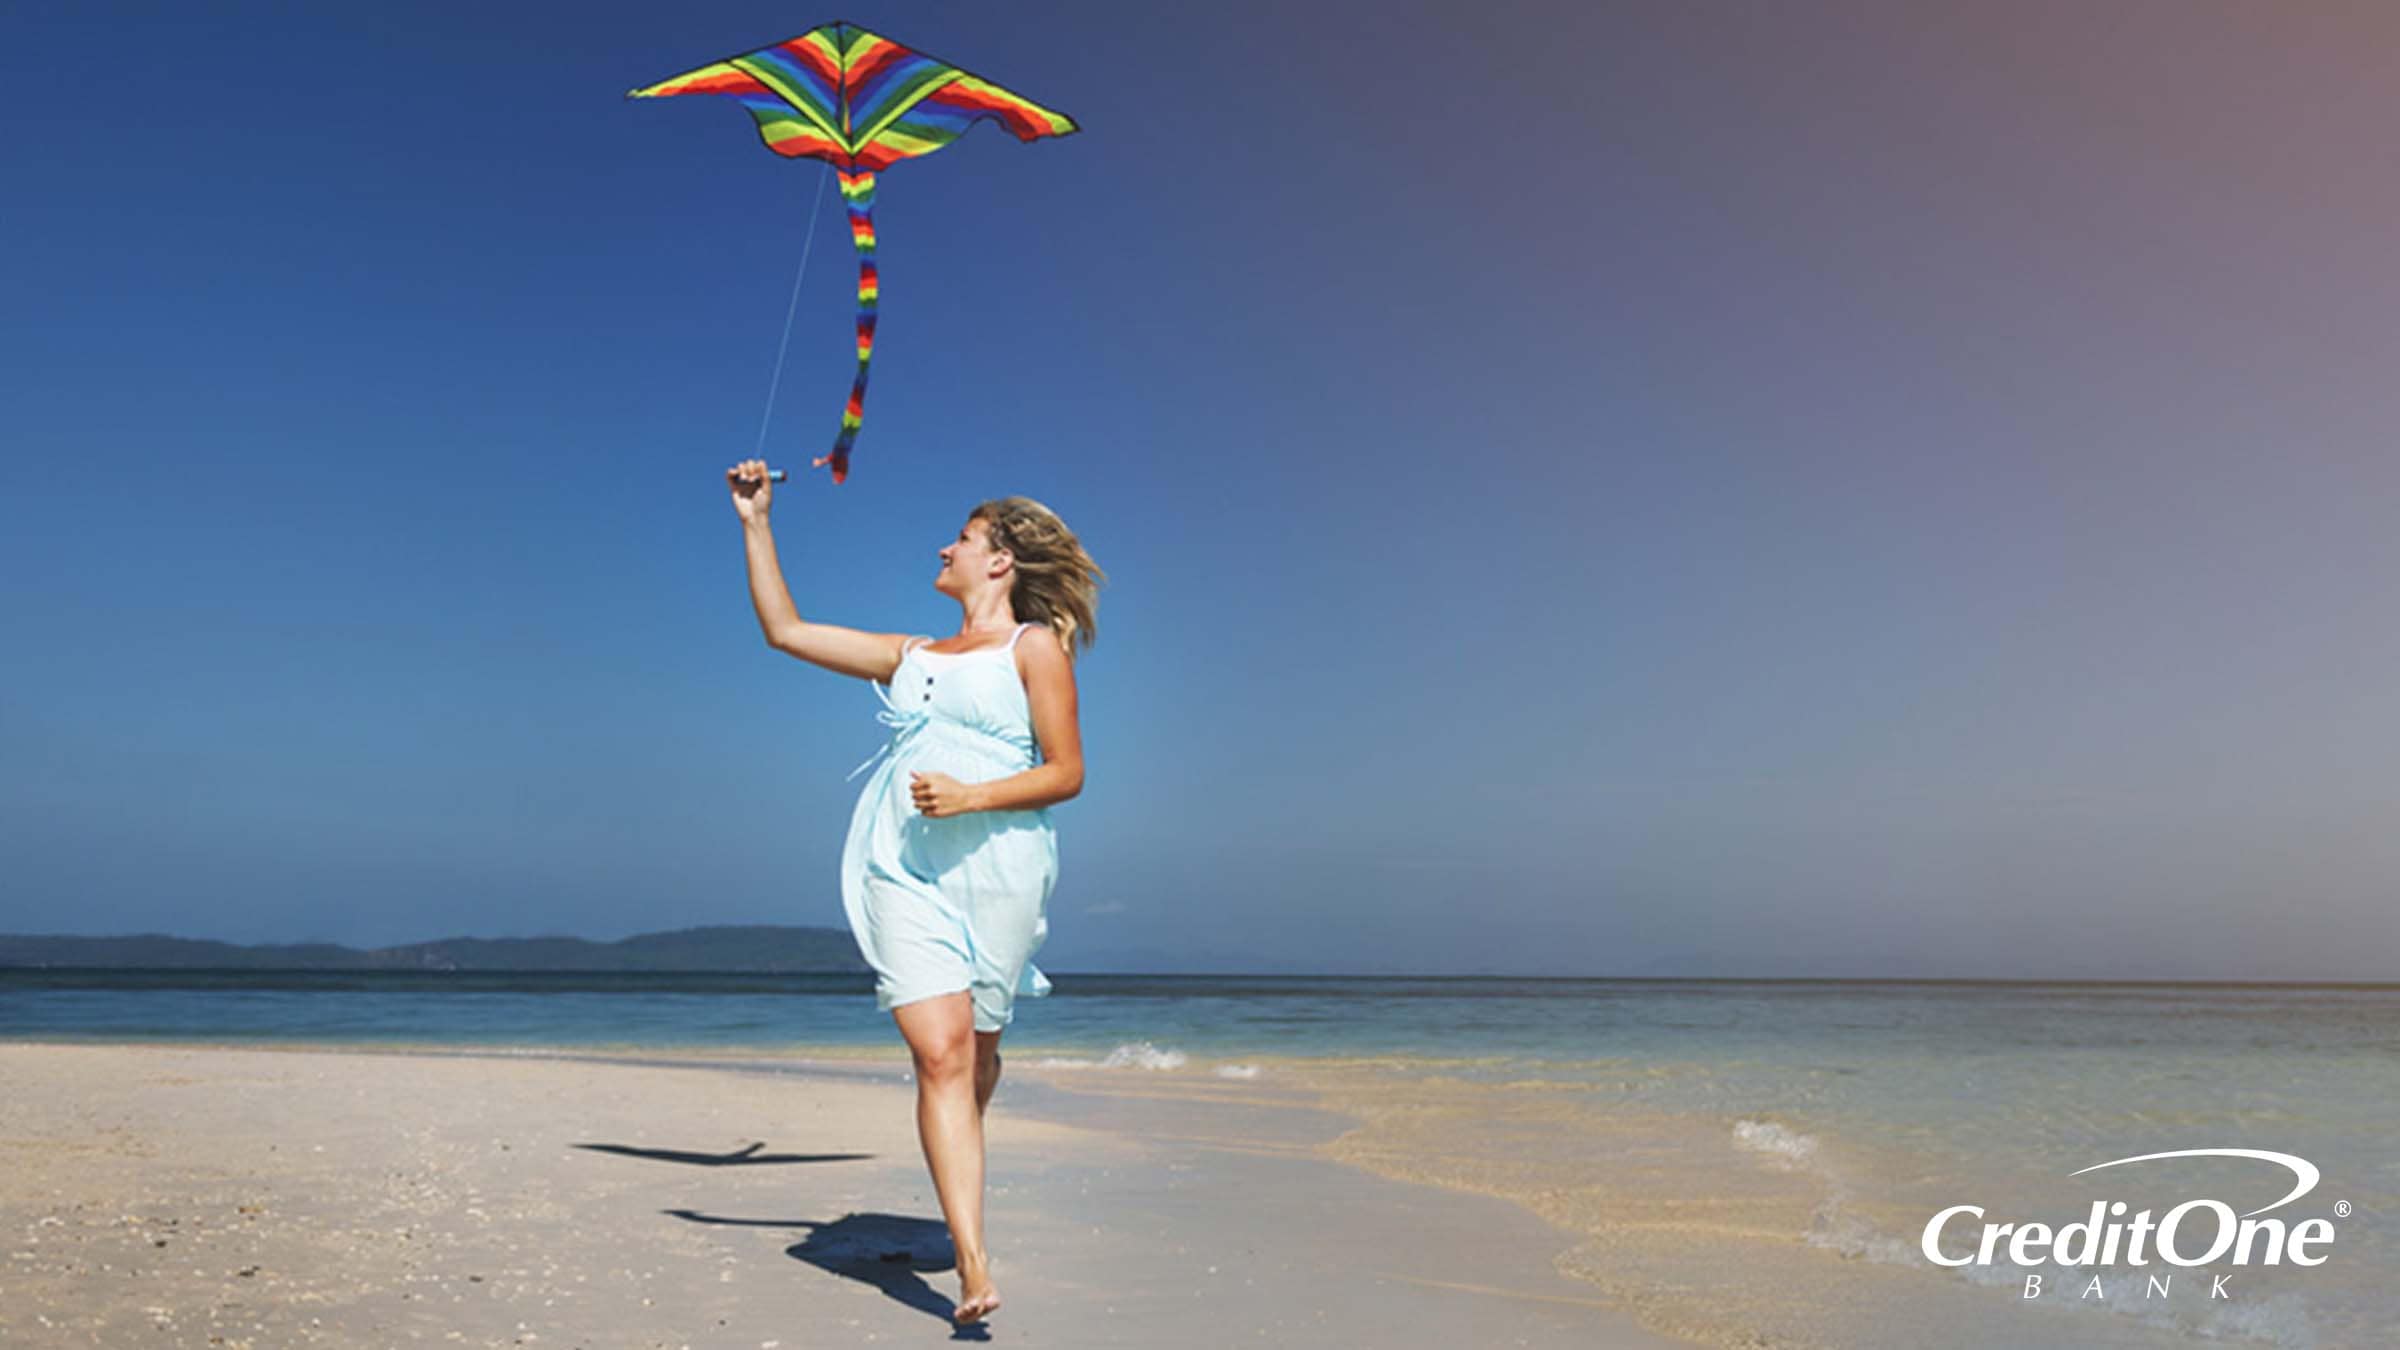 A woman flies a kite high in the air, signifying her credit score going higher and higher.